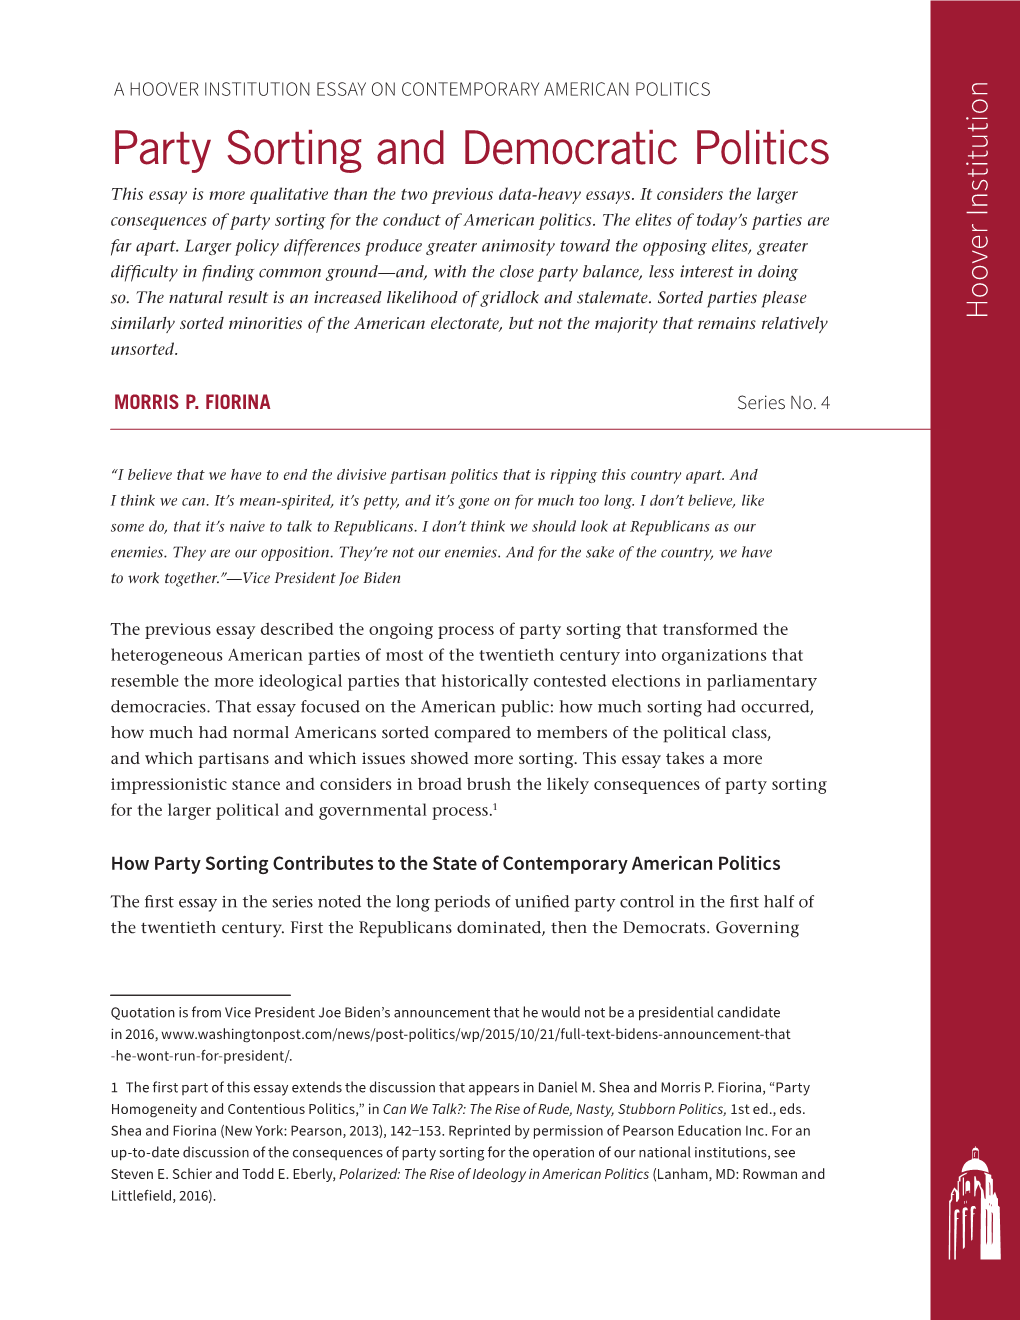 Party Sorting and Democratic Politics - Littlefield, 2016).Littlefield, (Lanham, MD: Rowman Politics and American in Ideology of Rise the Todd E